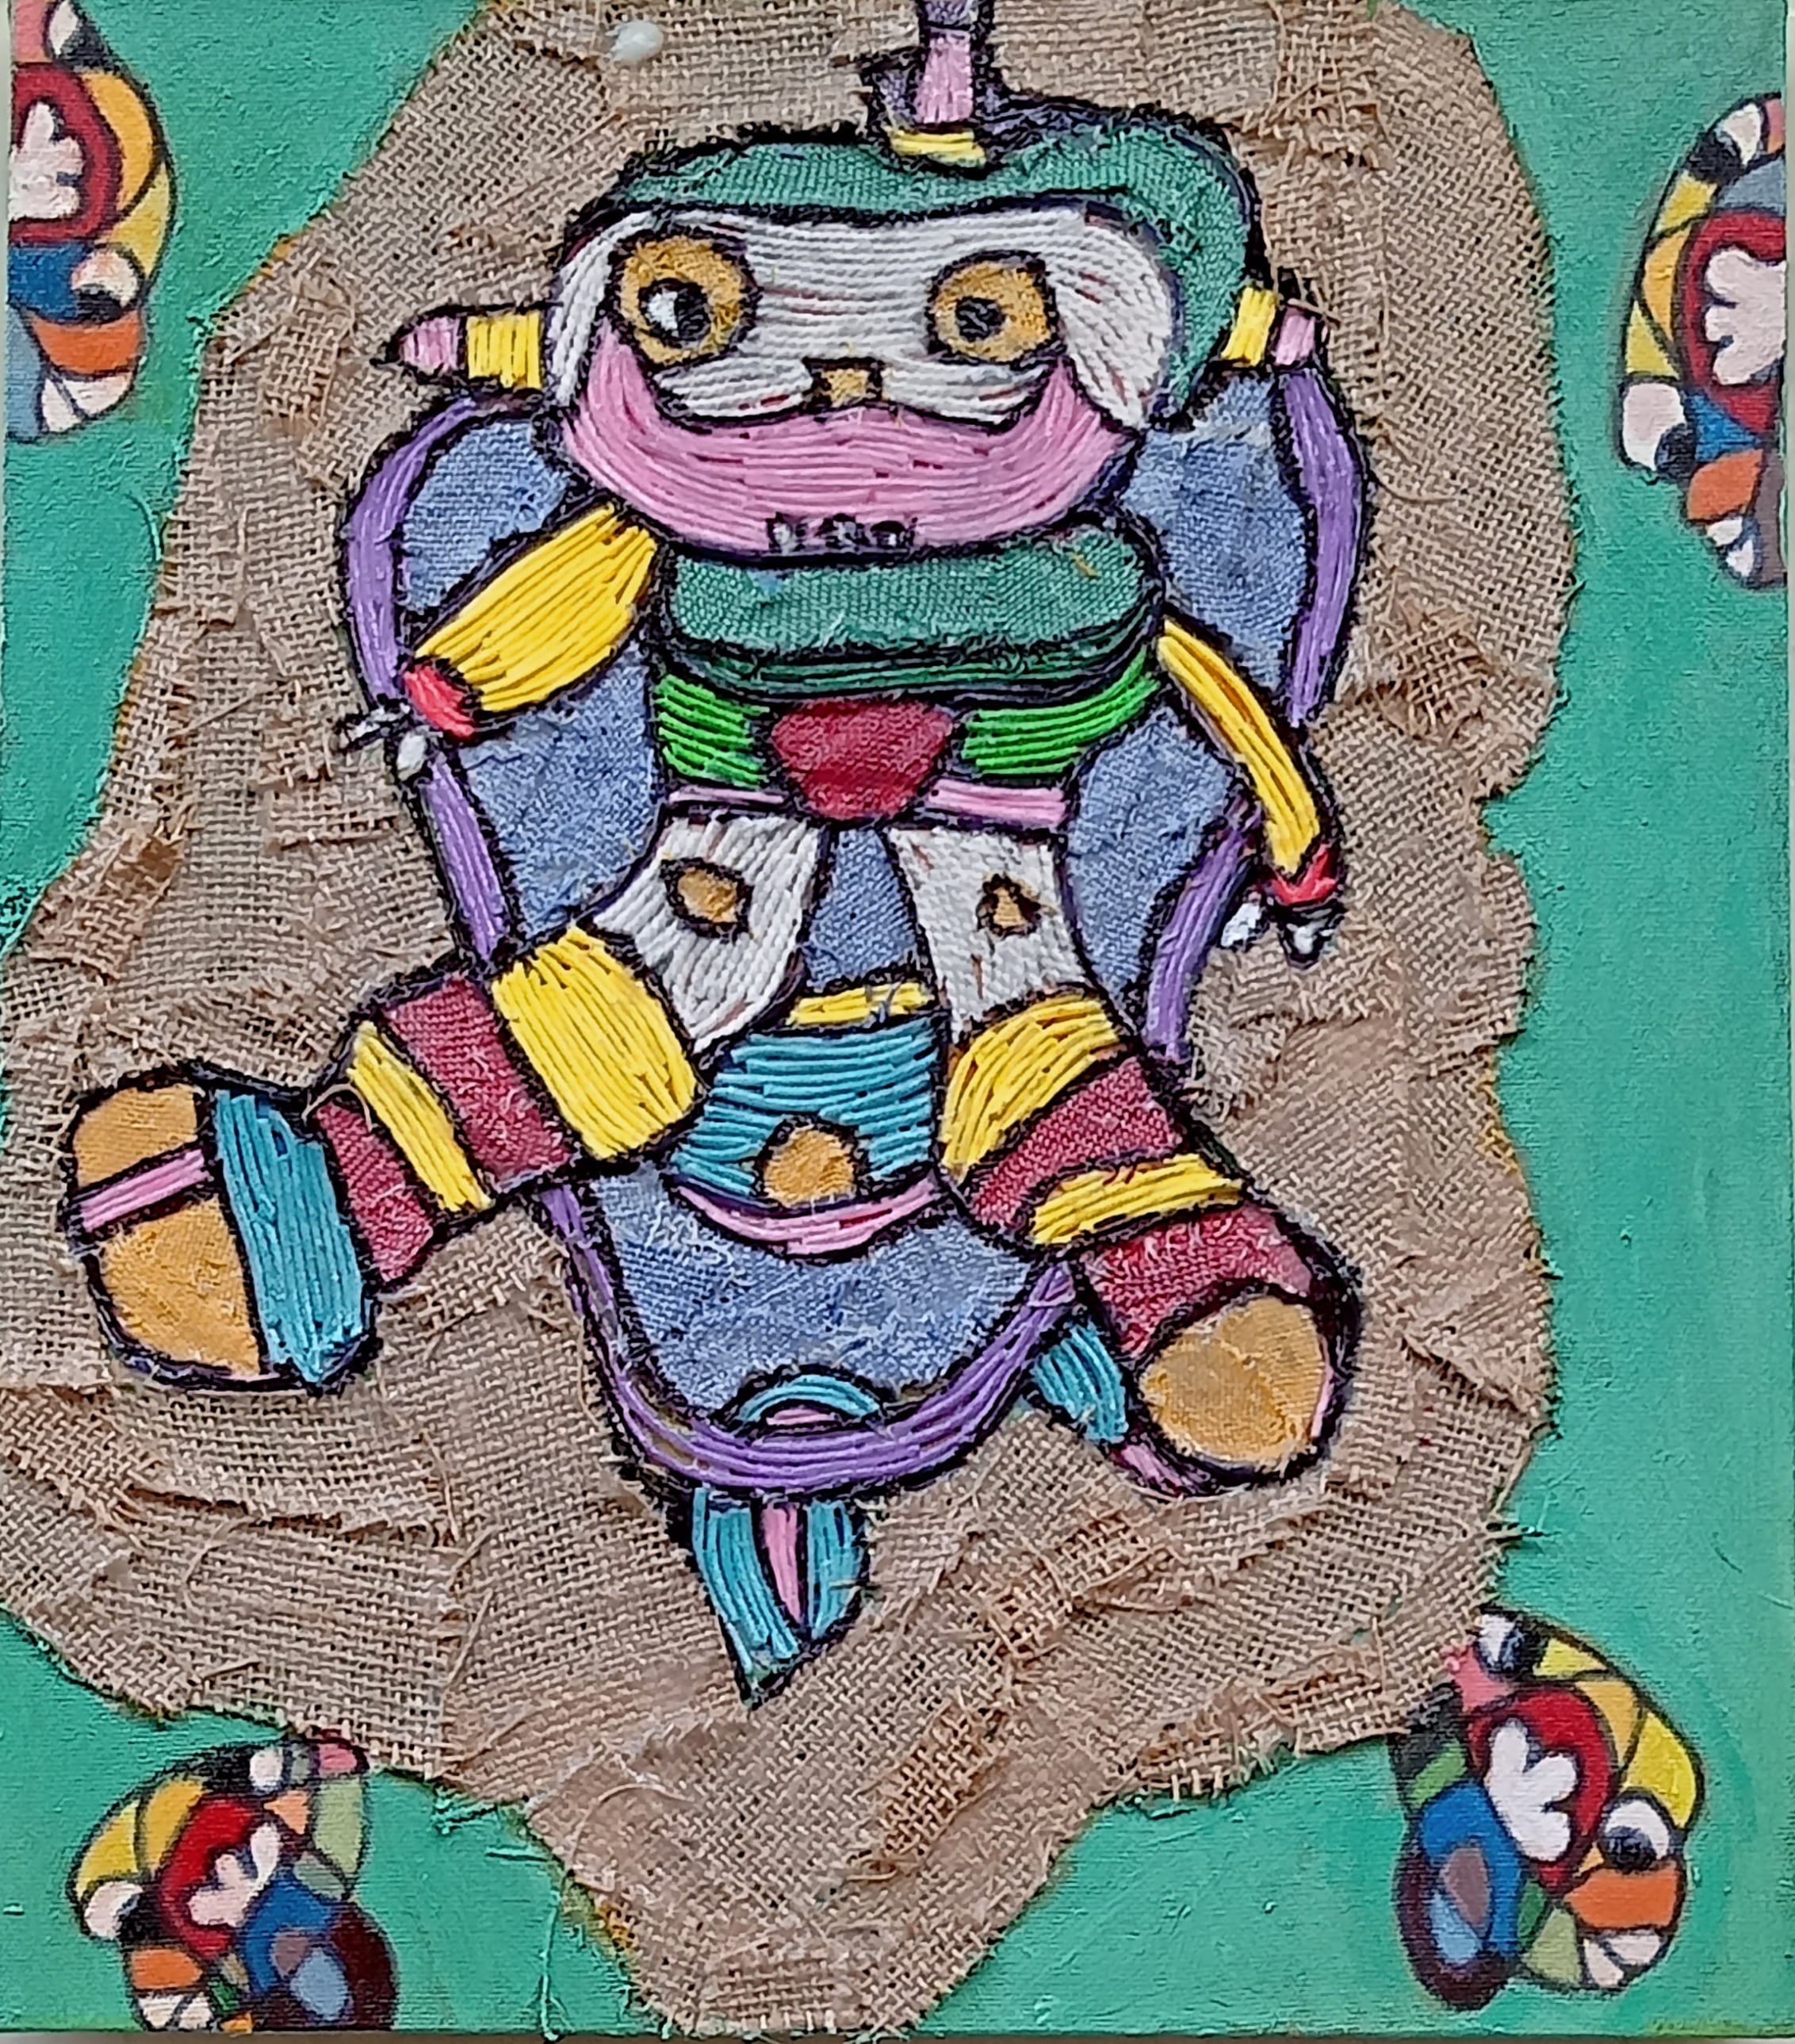 'STRONG BABY' - Mixed Medium on Canvas